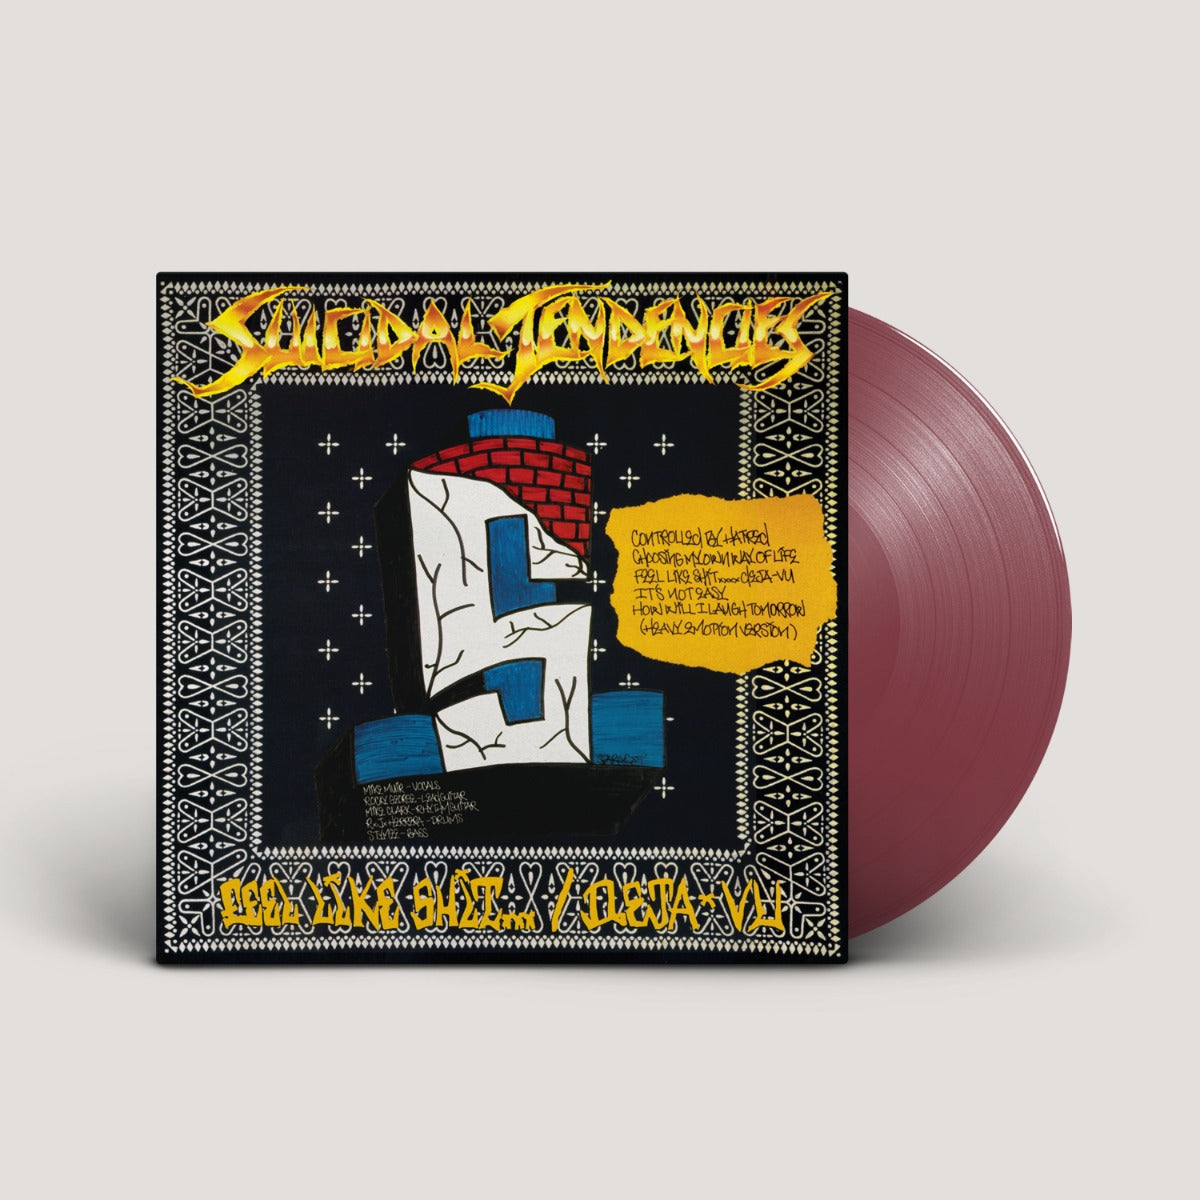 Suicidal Tendencies - Controlled By Hatred/Feel Like Shit...Deja Vu (Indie Excliusive, Friut Punch Colored Vinyl)